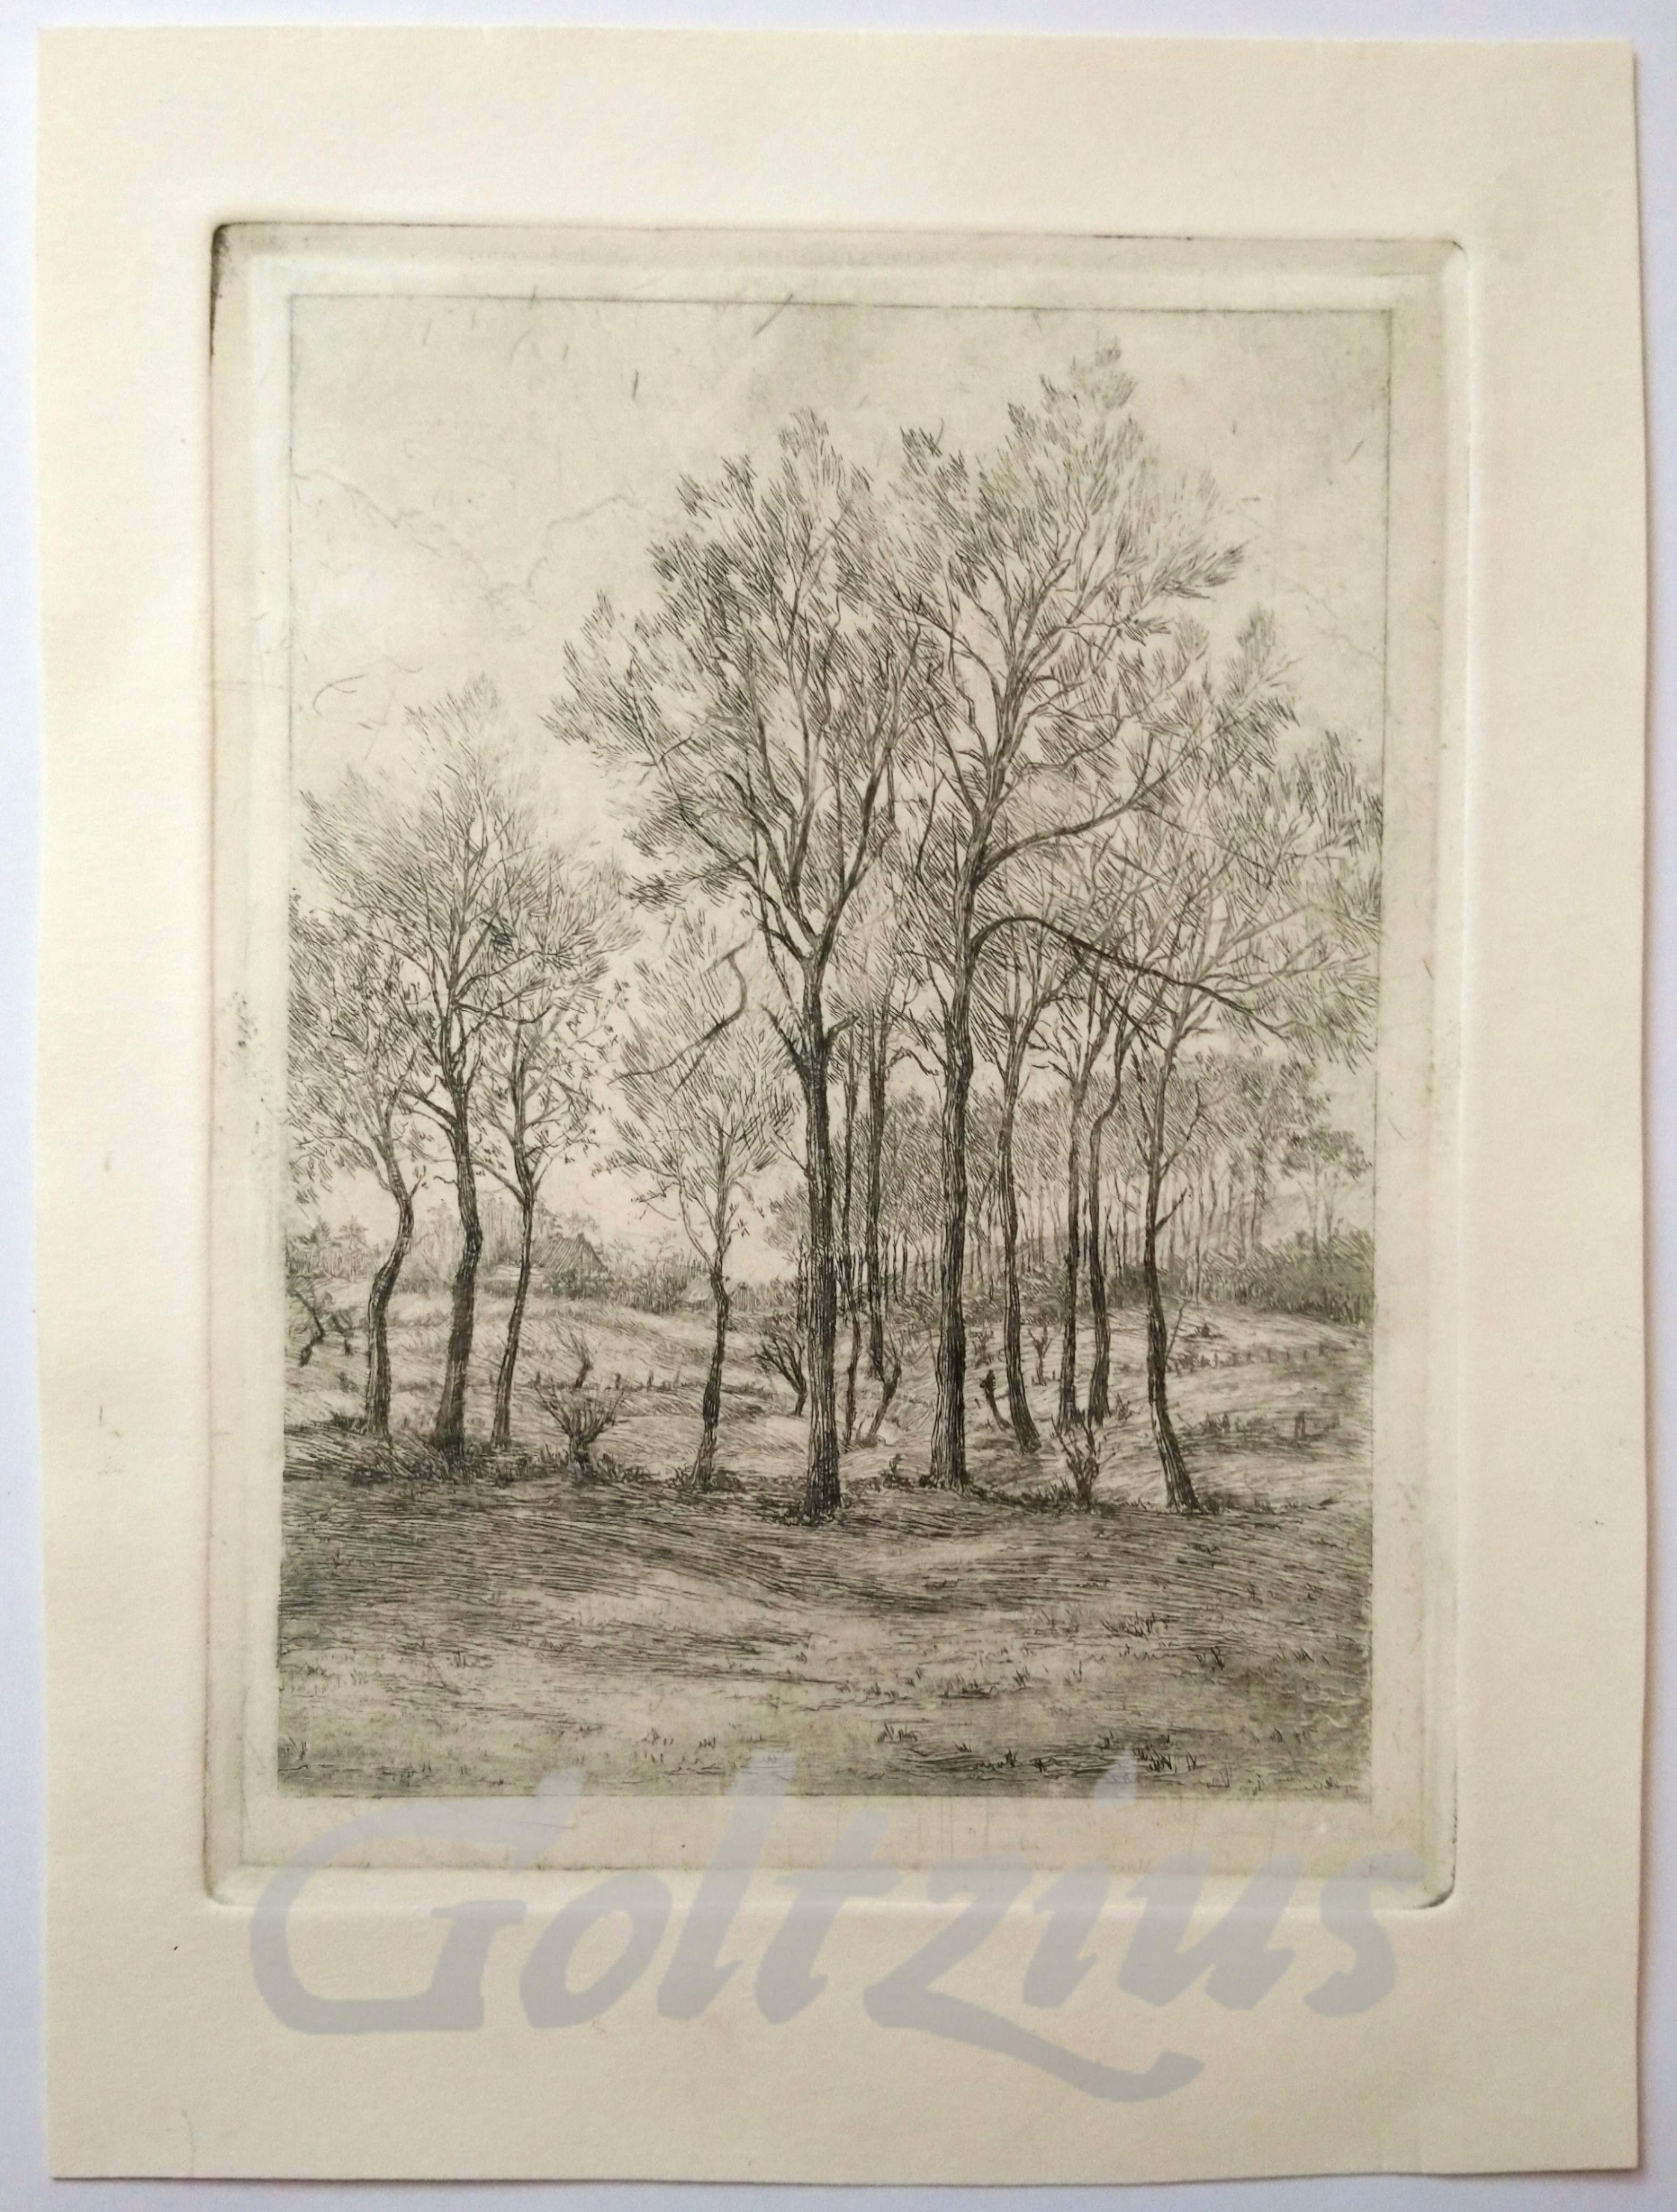 ANONYMOUS, Landscape with trees